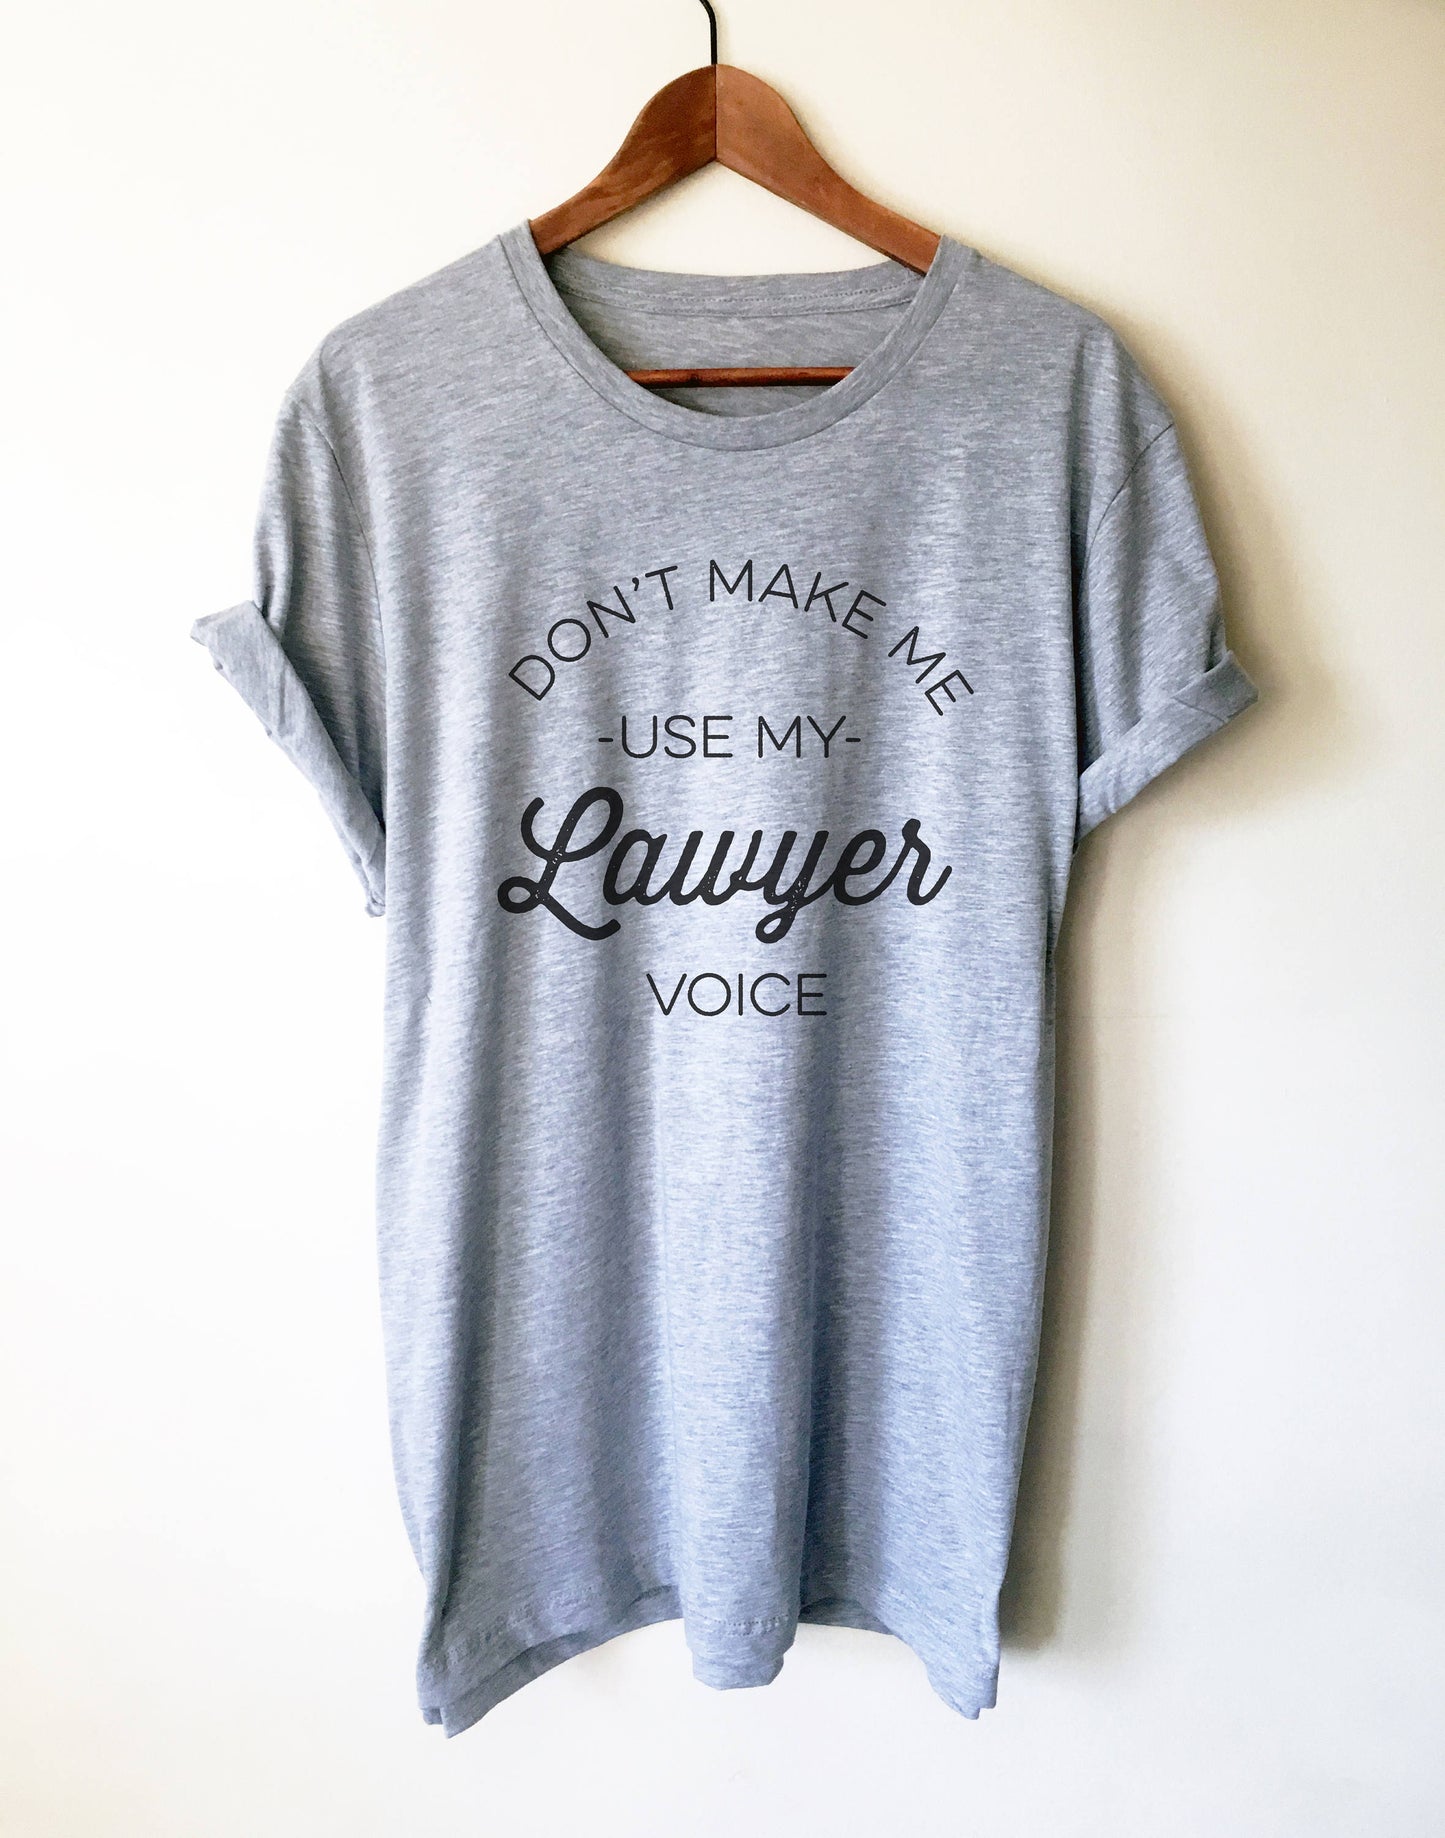 Don't Make Me Use My Lawyer Voice Unisex T-Shirt - Lawyer Shirt, Lawyer Gift, Law School, College Student Gift, Law Student, Graduation Gift